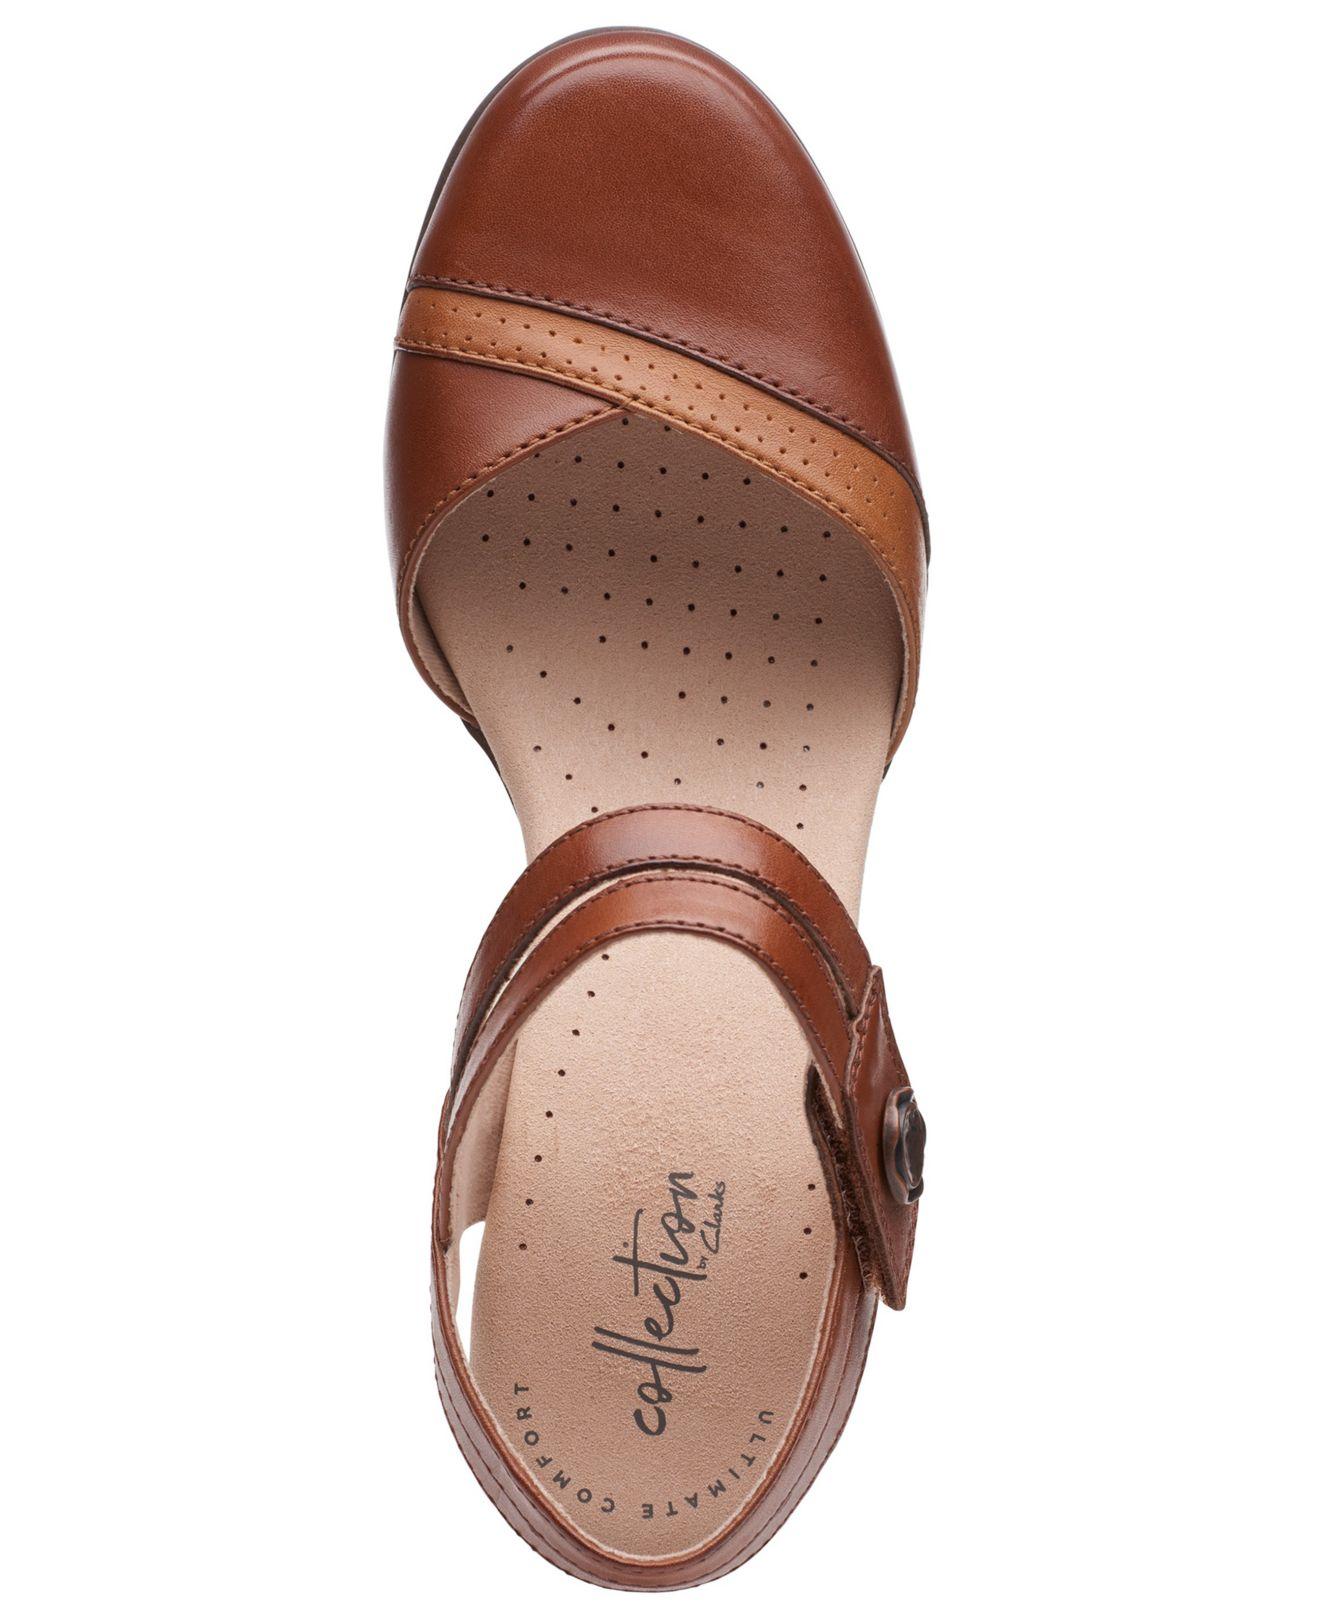 Clarks Leather Valarie Rally Pumps in Tan (Brown) - Lyst